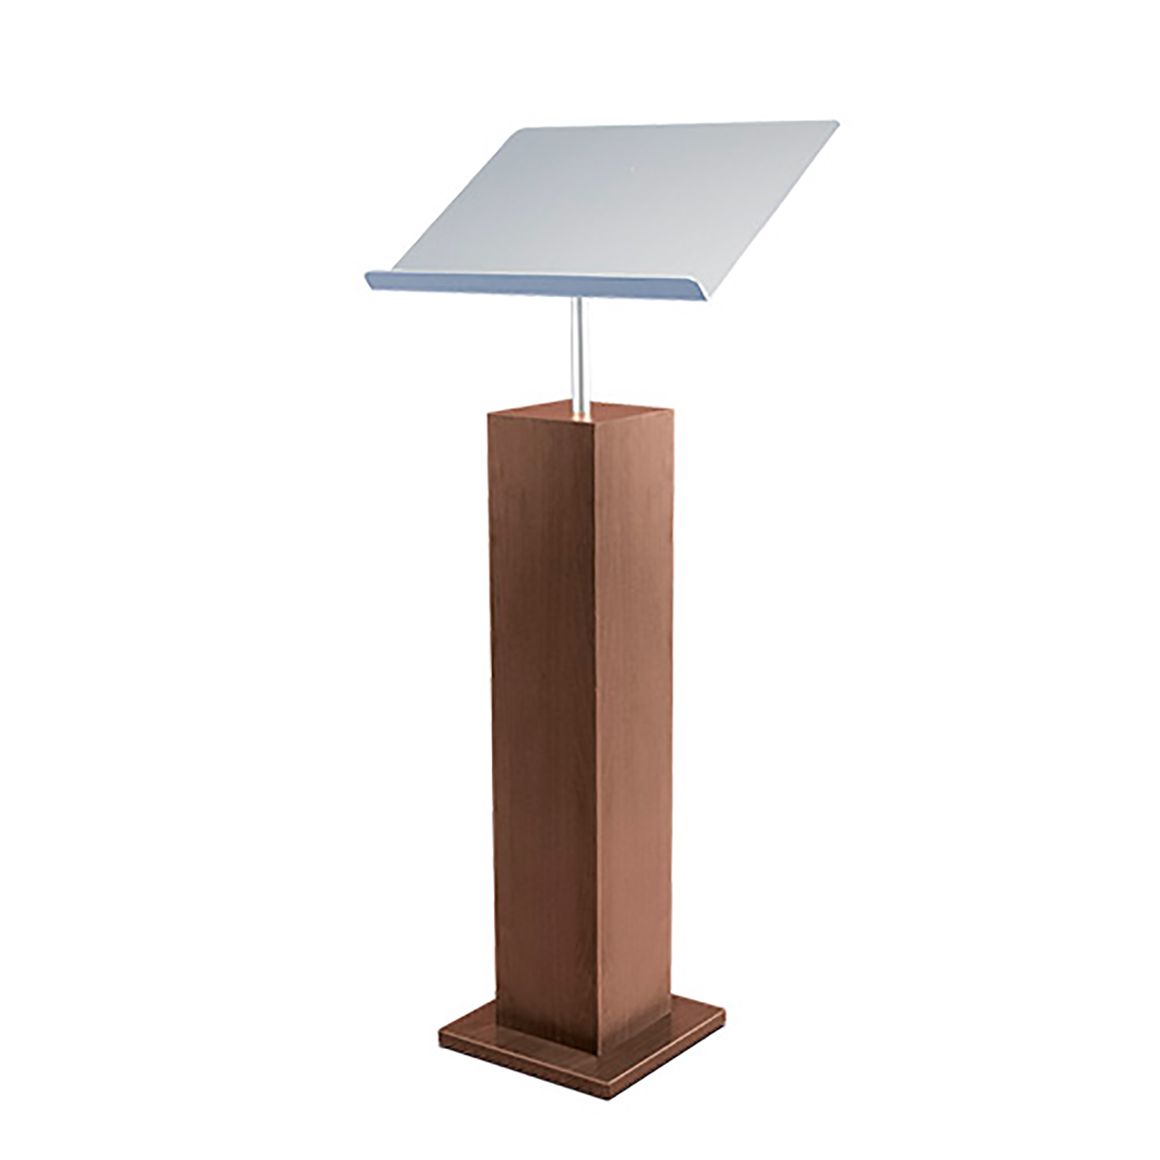 Lectern Stand made of Wood